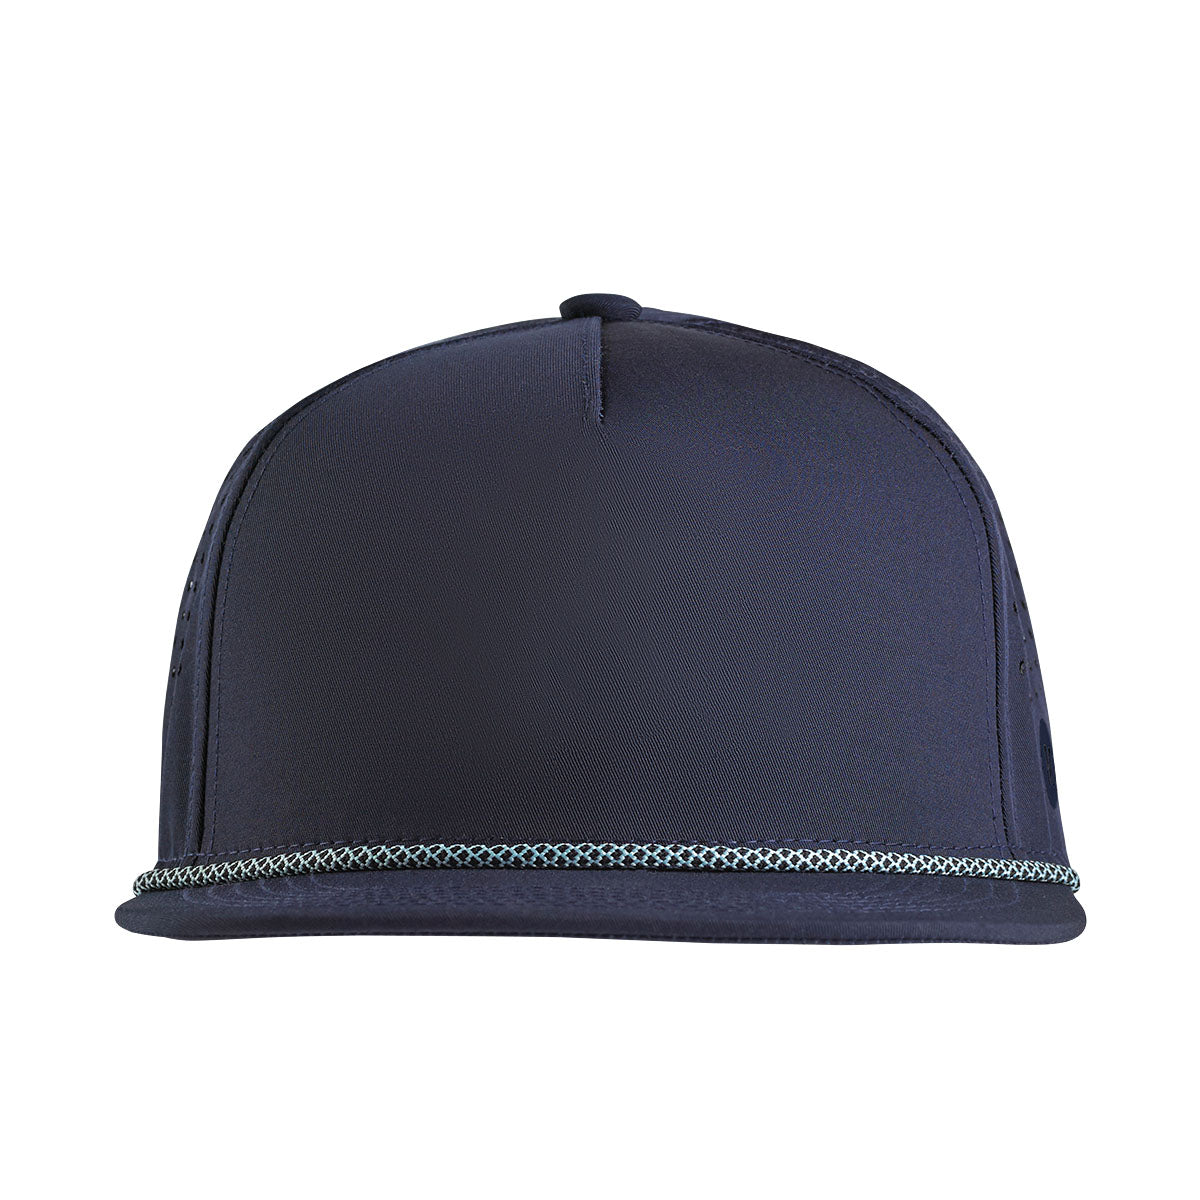 Blank Trucker Hat - Navy Blue - Customize Your Style